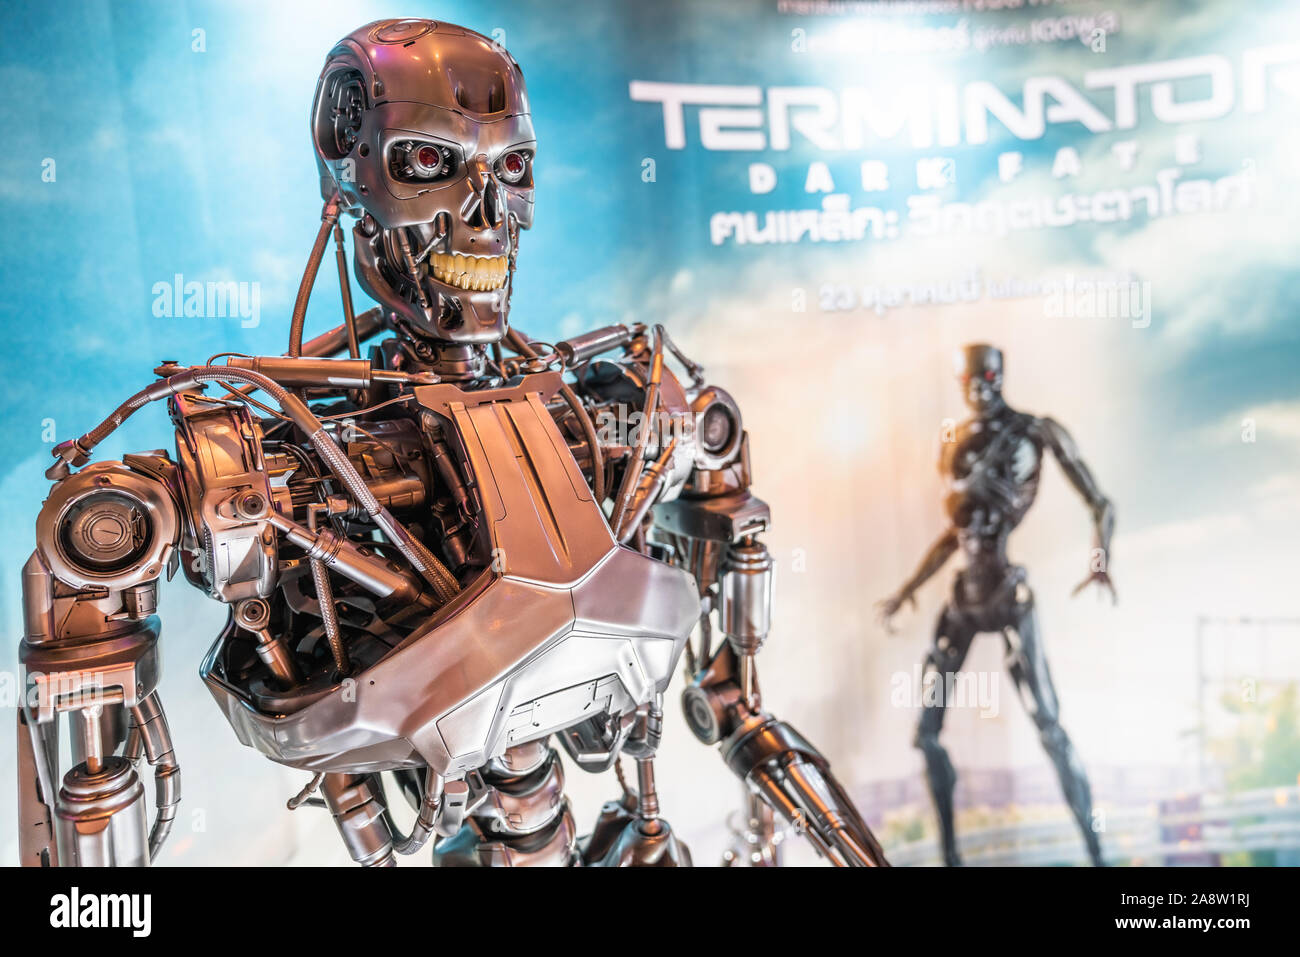 Bangkok, Thailand - Oct 25, 2019: Terminator dark Fate movie advertisement backdrop booth with T-800 robot machine model statue showing at cinema Stock Photo